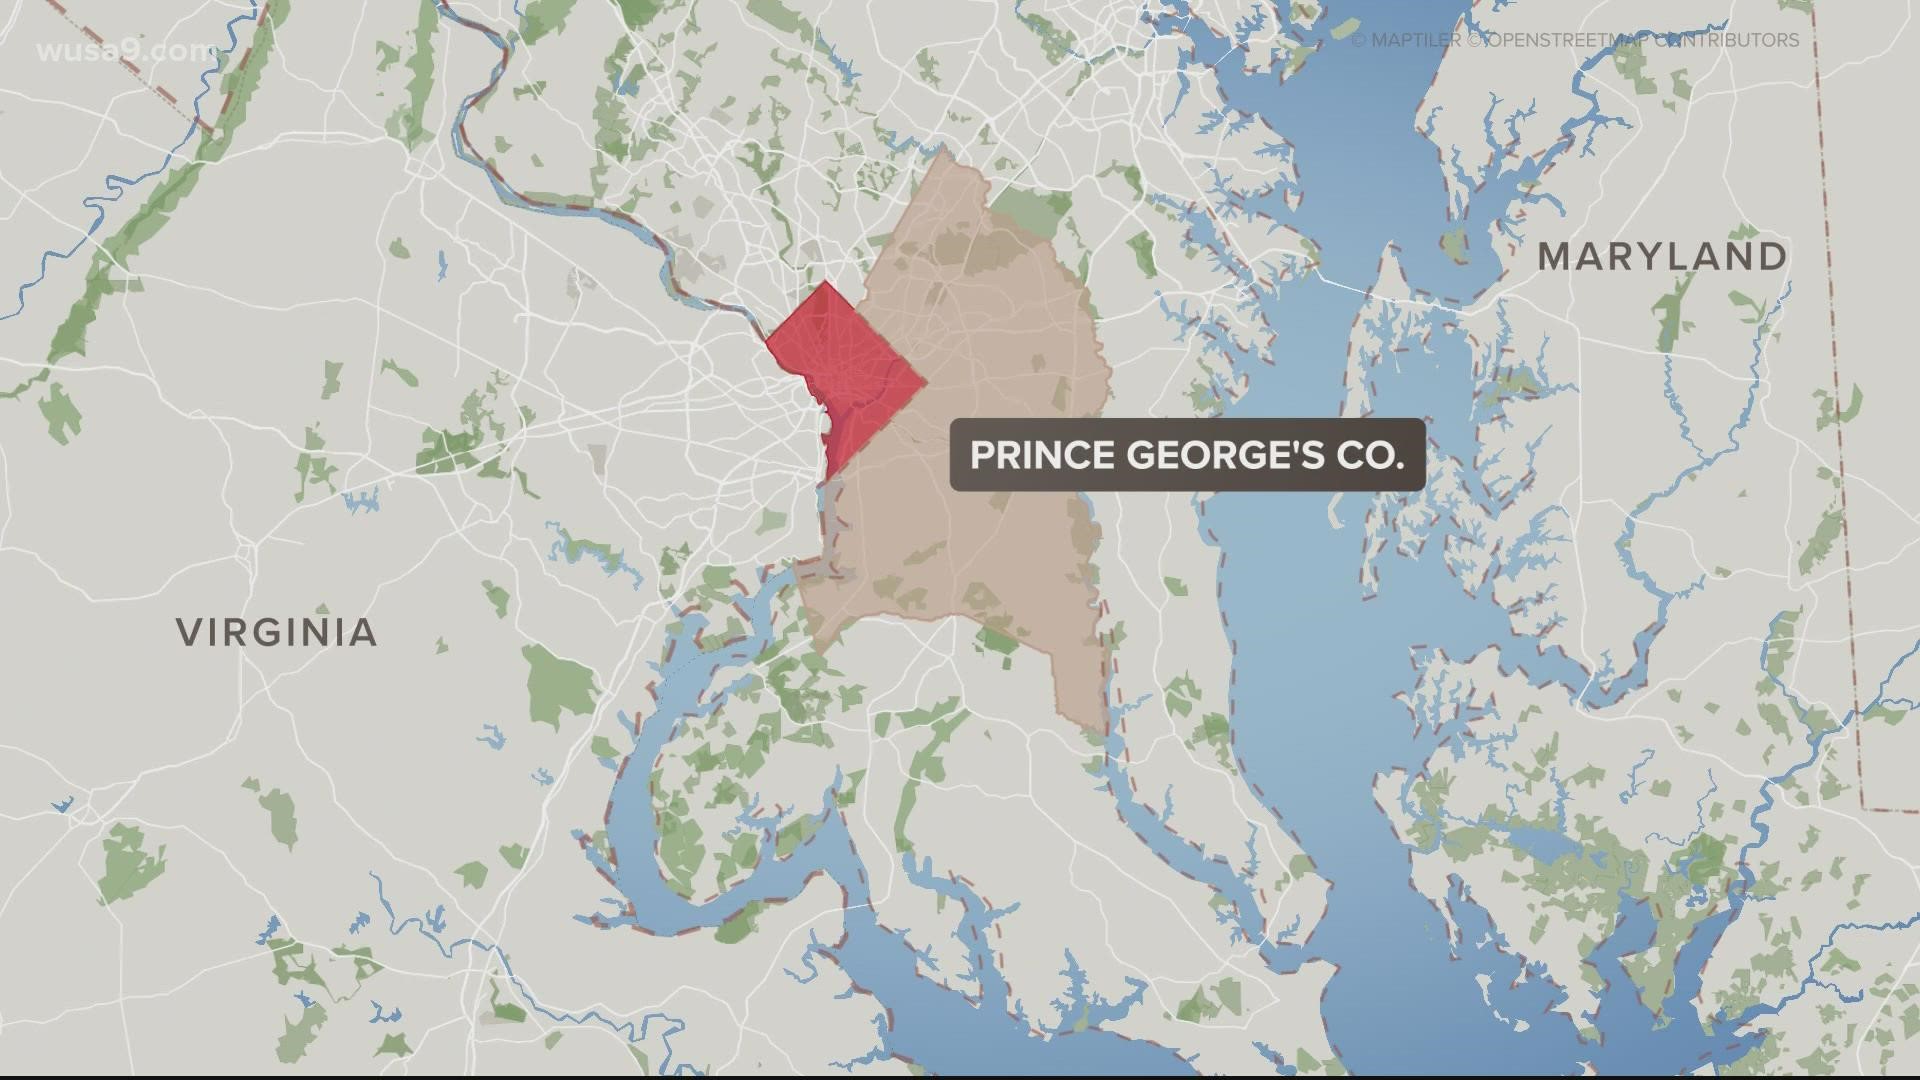 Around 4:30 p.m. Saturday, Prince George’s County Police responded to a report of a shooting in Upper Marlboro.